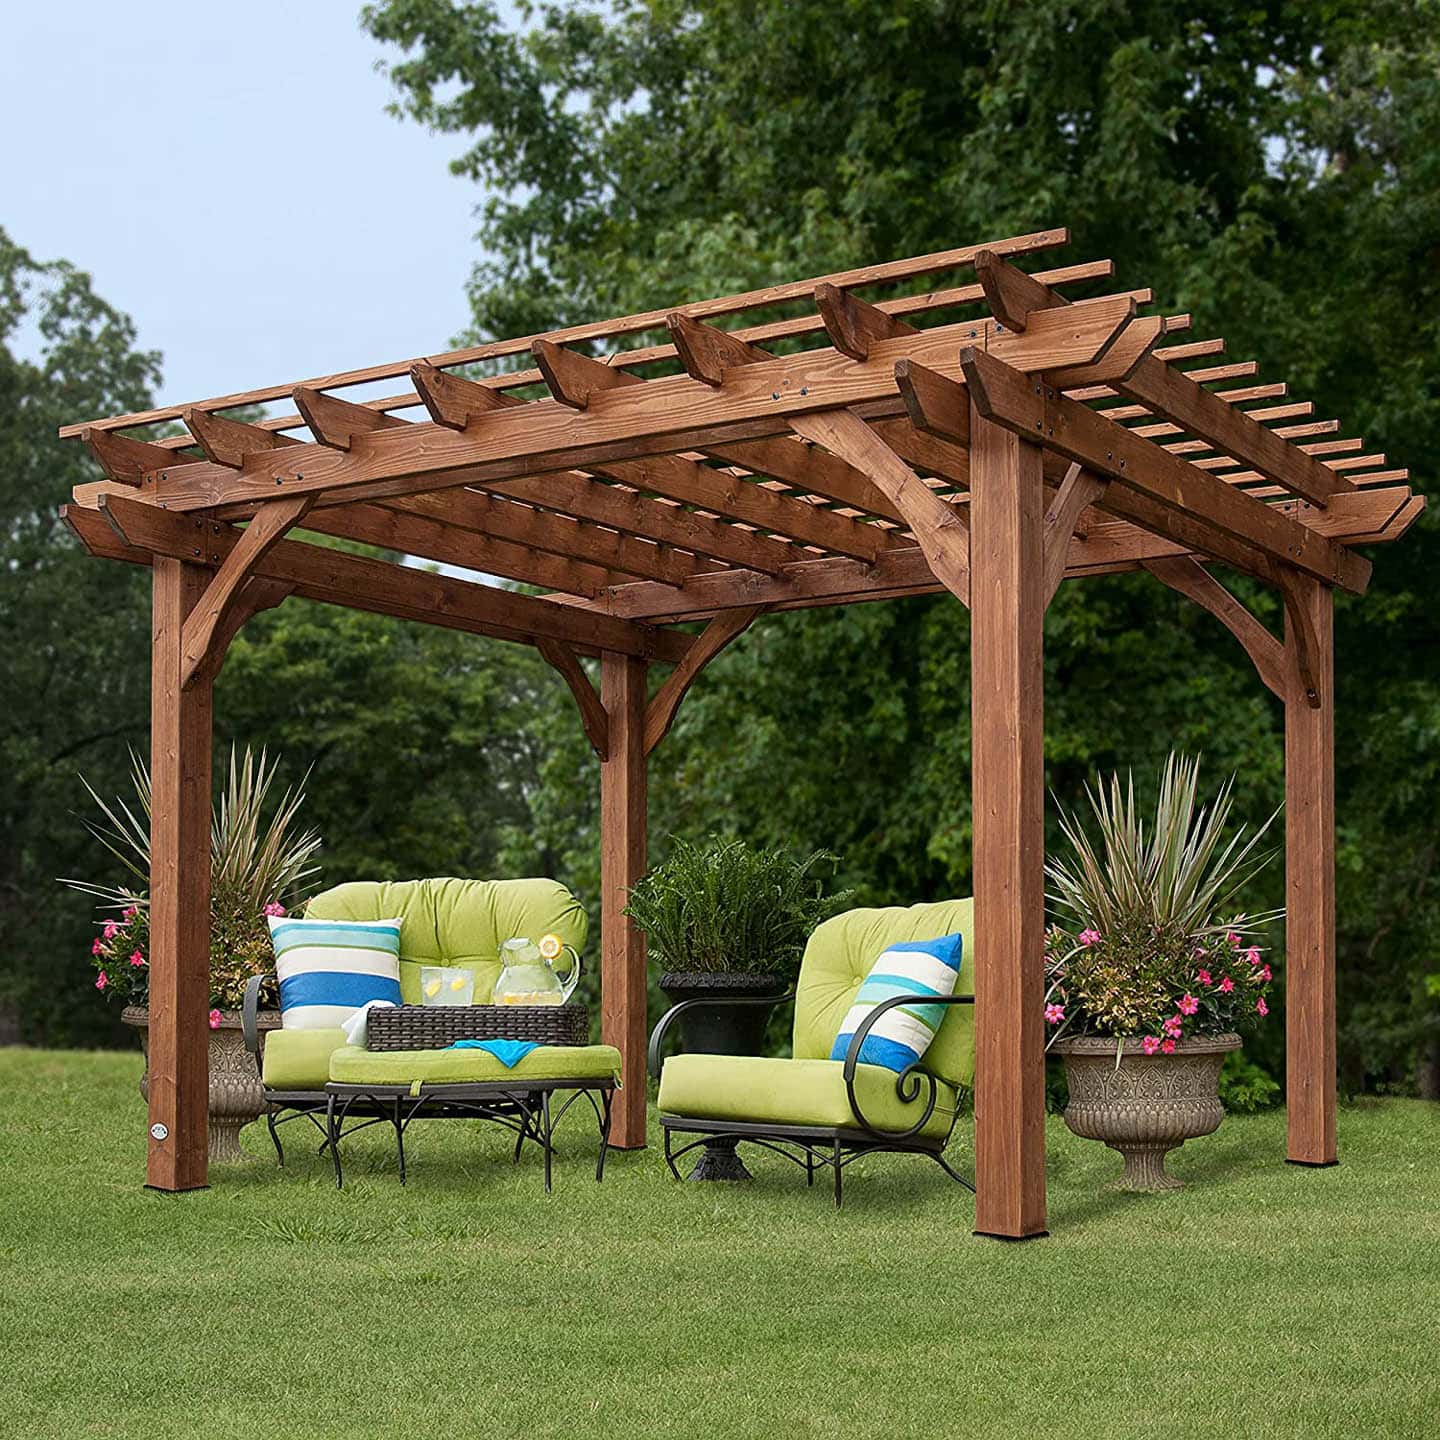 Large cedar pergola over two outdoor armchairs in the middle of a yard